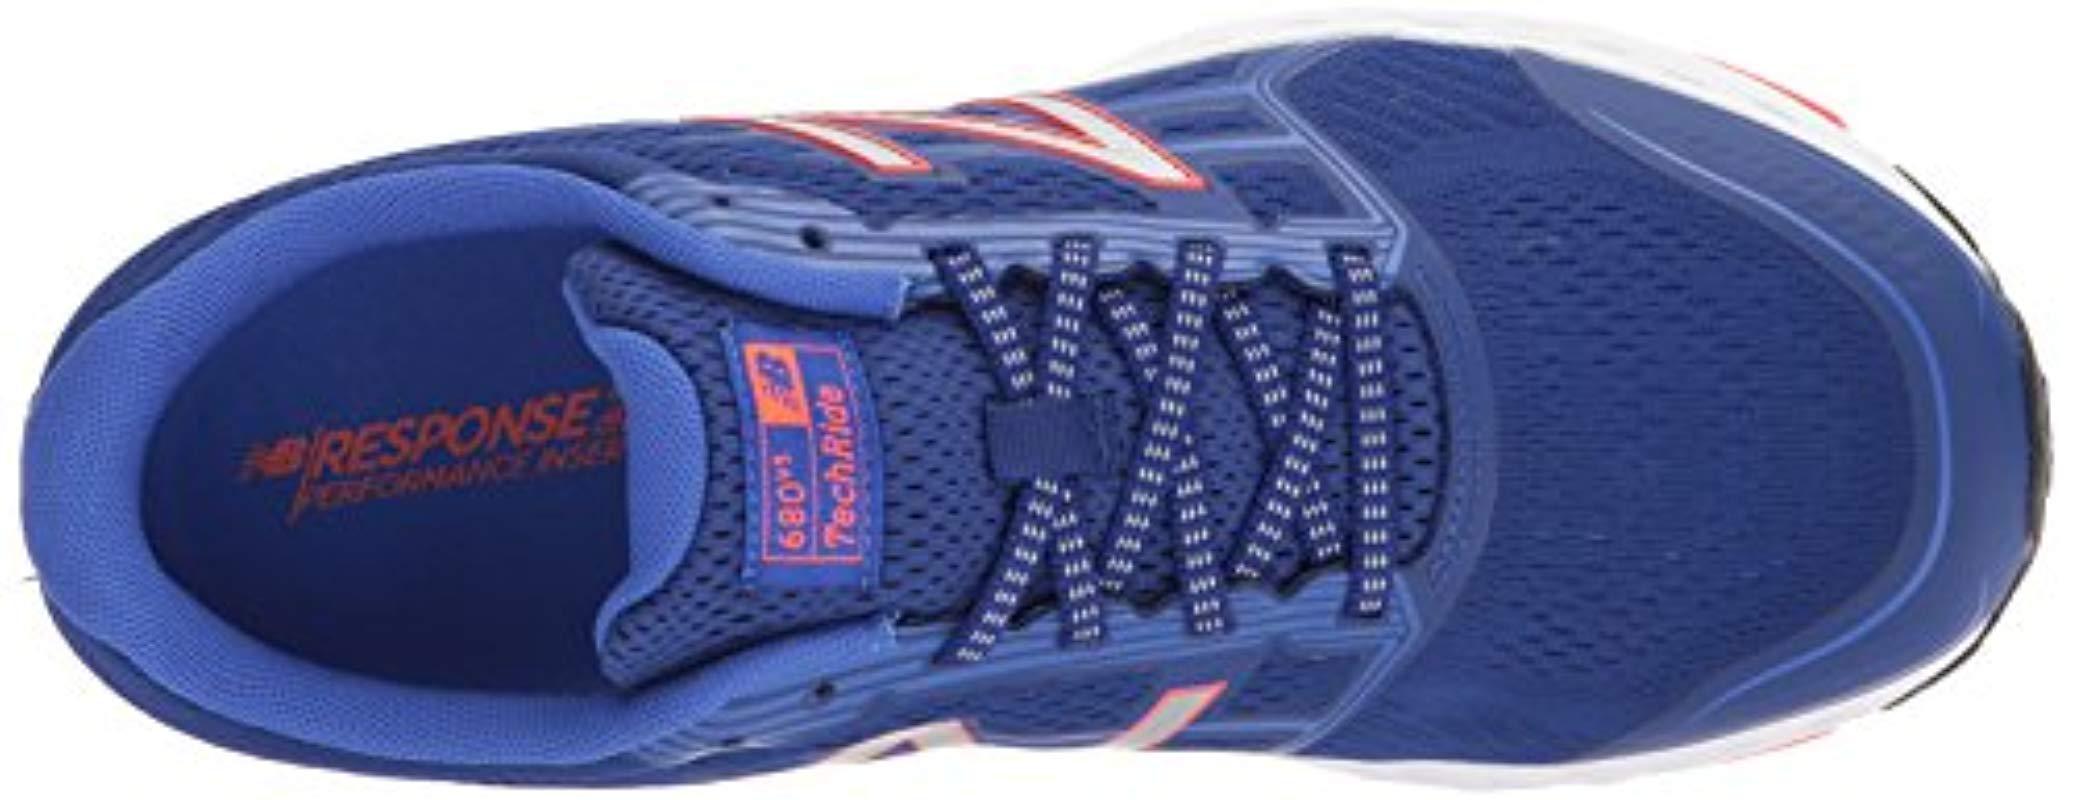 New Balance Synthetic 680v5 Cushioning Running Shoe in Blue (Blue) (Blue)  for Men - Lyst